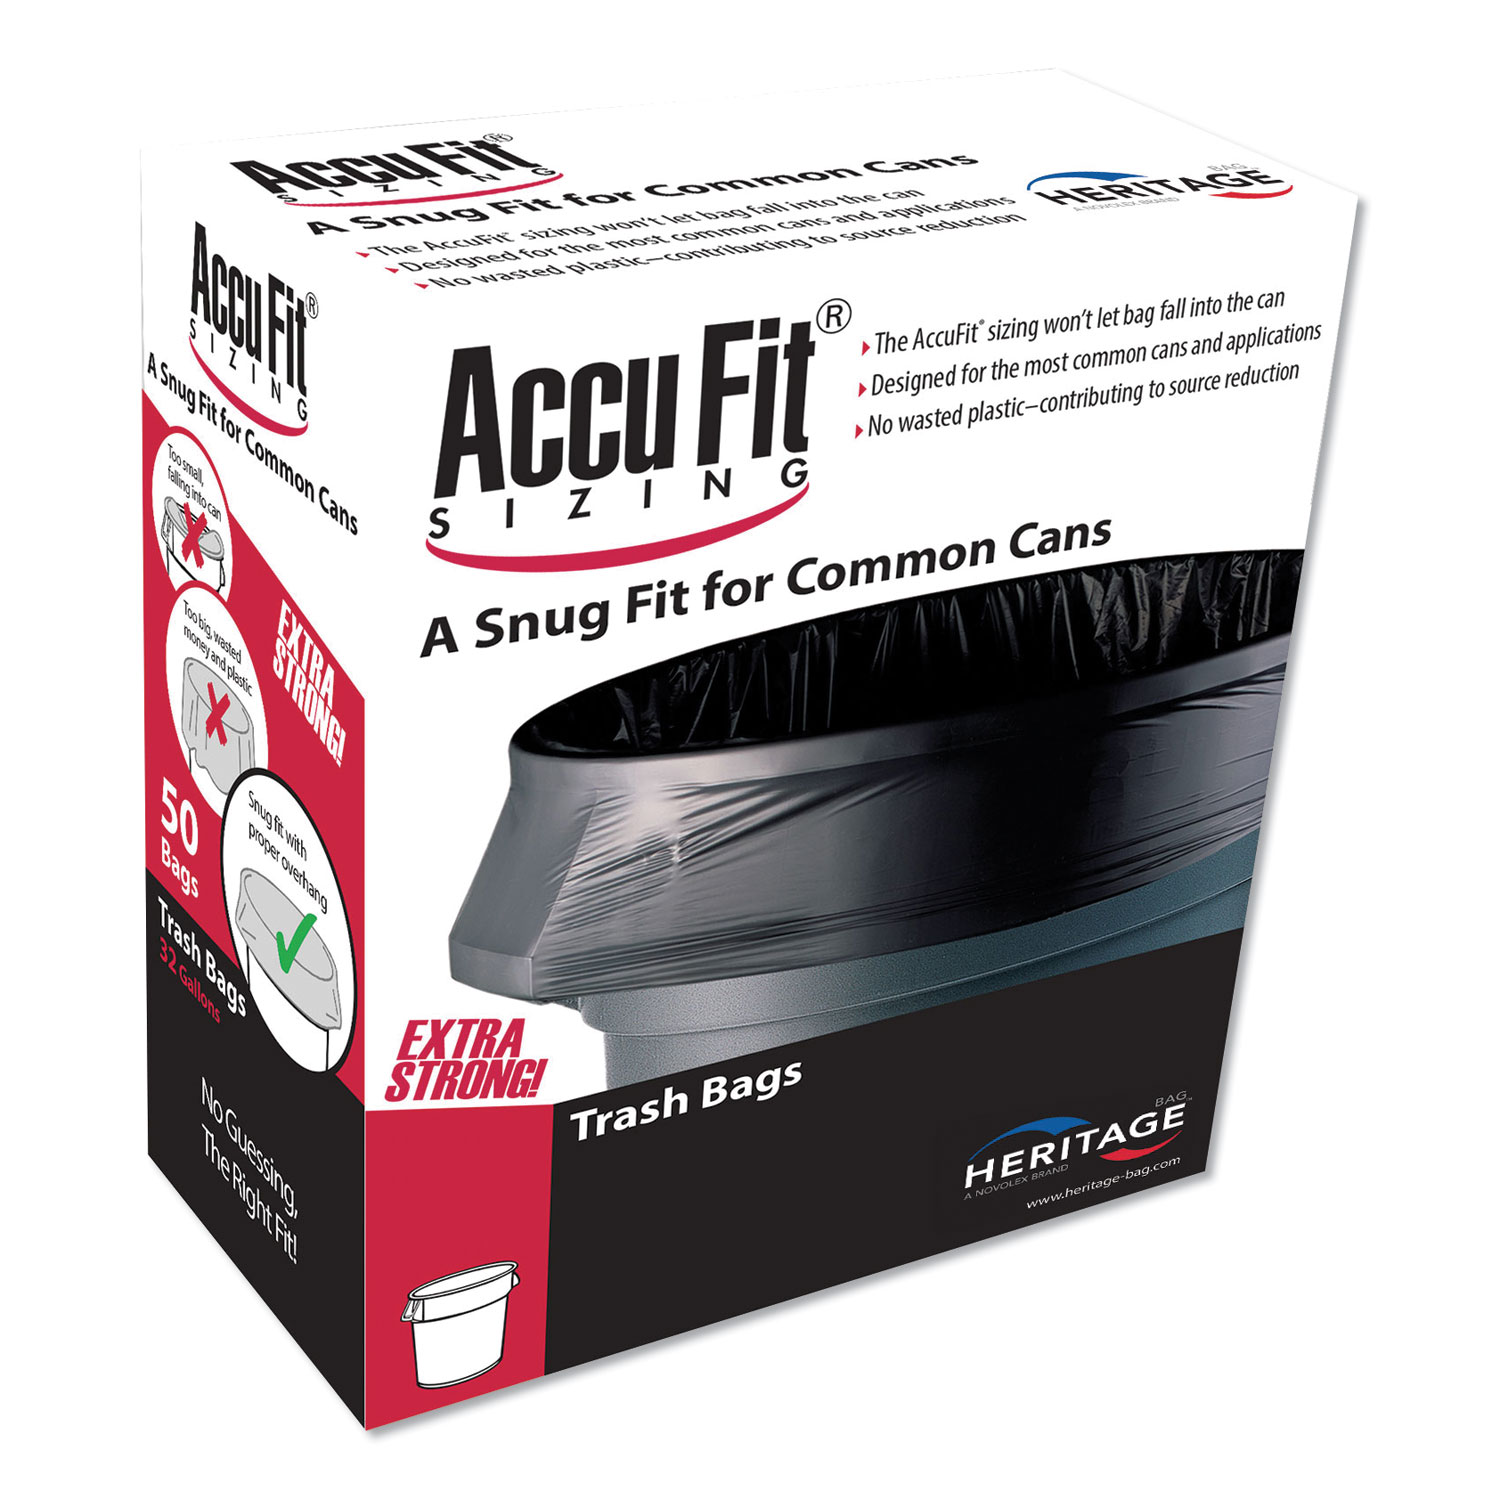  AccuFit H5645TK RC1 Linear Low Density Can Liners with AccuFit Sizing, 23 gal, 0.9 mil, 28 x 45, Black, 50/Box (HERH5645TKRC1) 